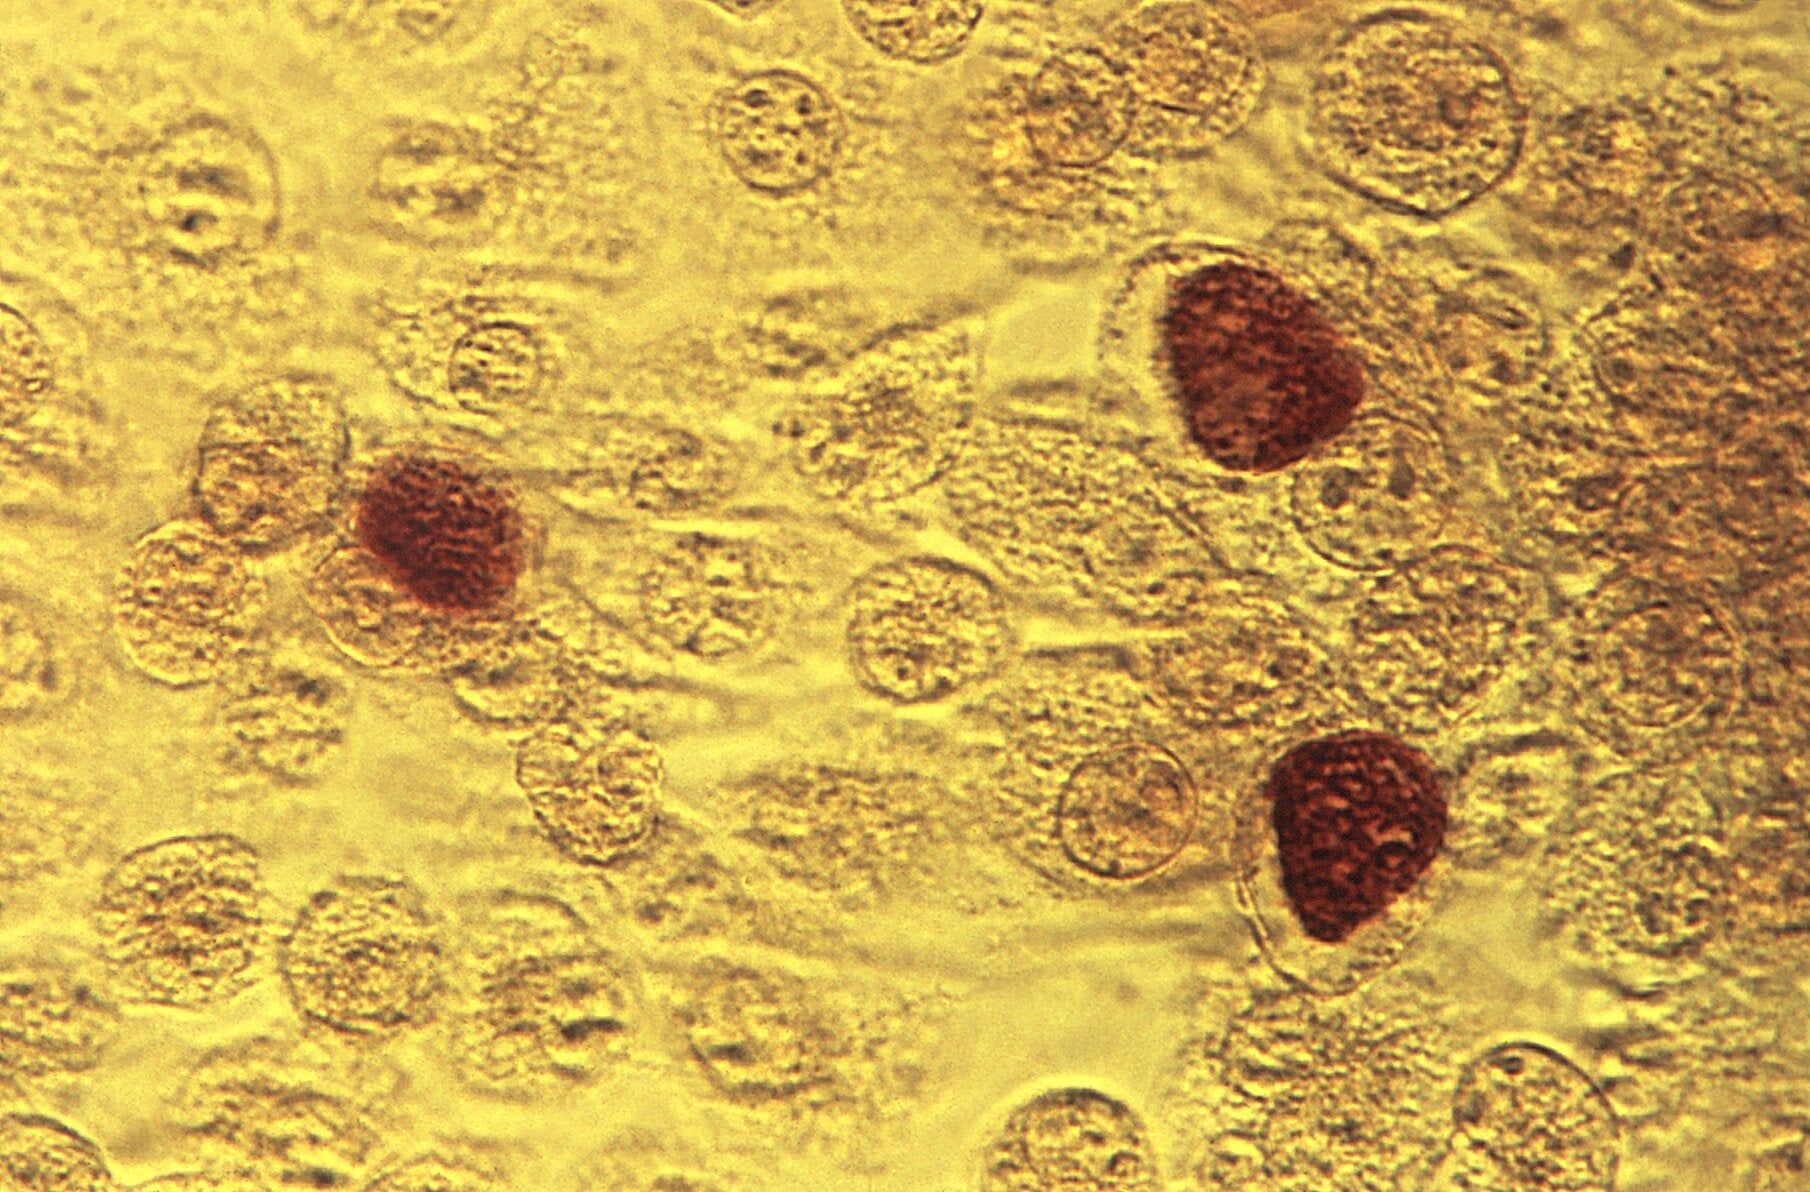 Chlamydia bacteria have a stage of life where they invade and live inside host cells, which can be seen above in the darker coloured circles. (Image: CDC/ Dr. E. Arum; Dr. N. Jacobs)